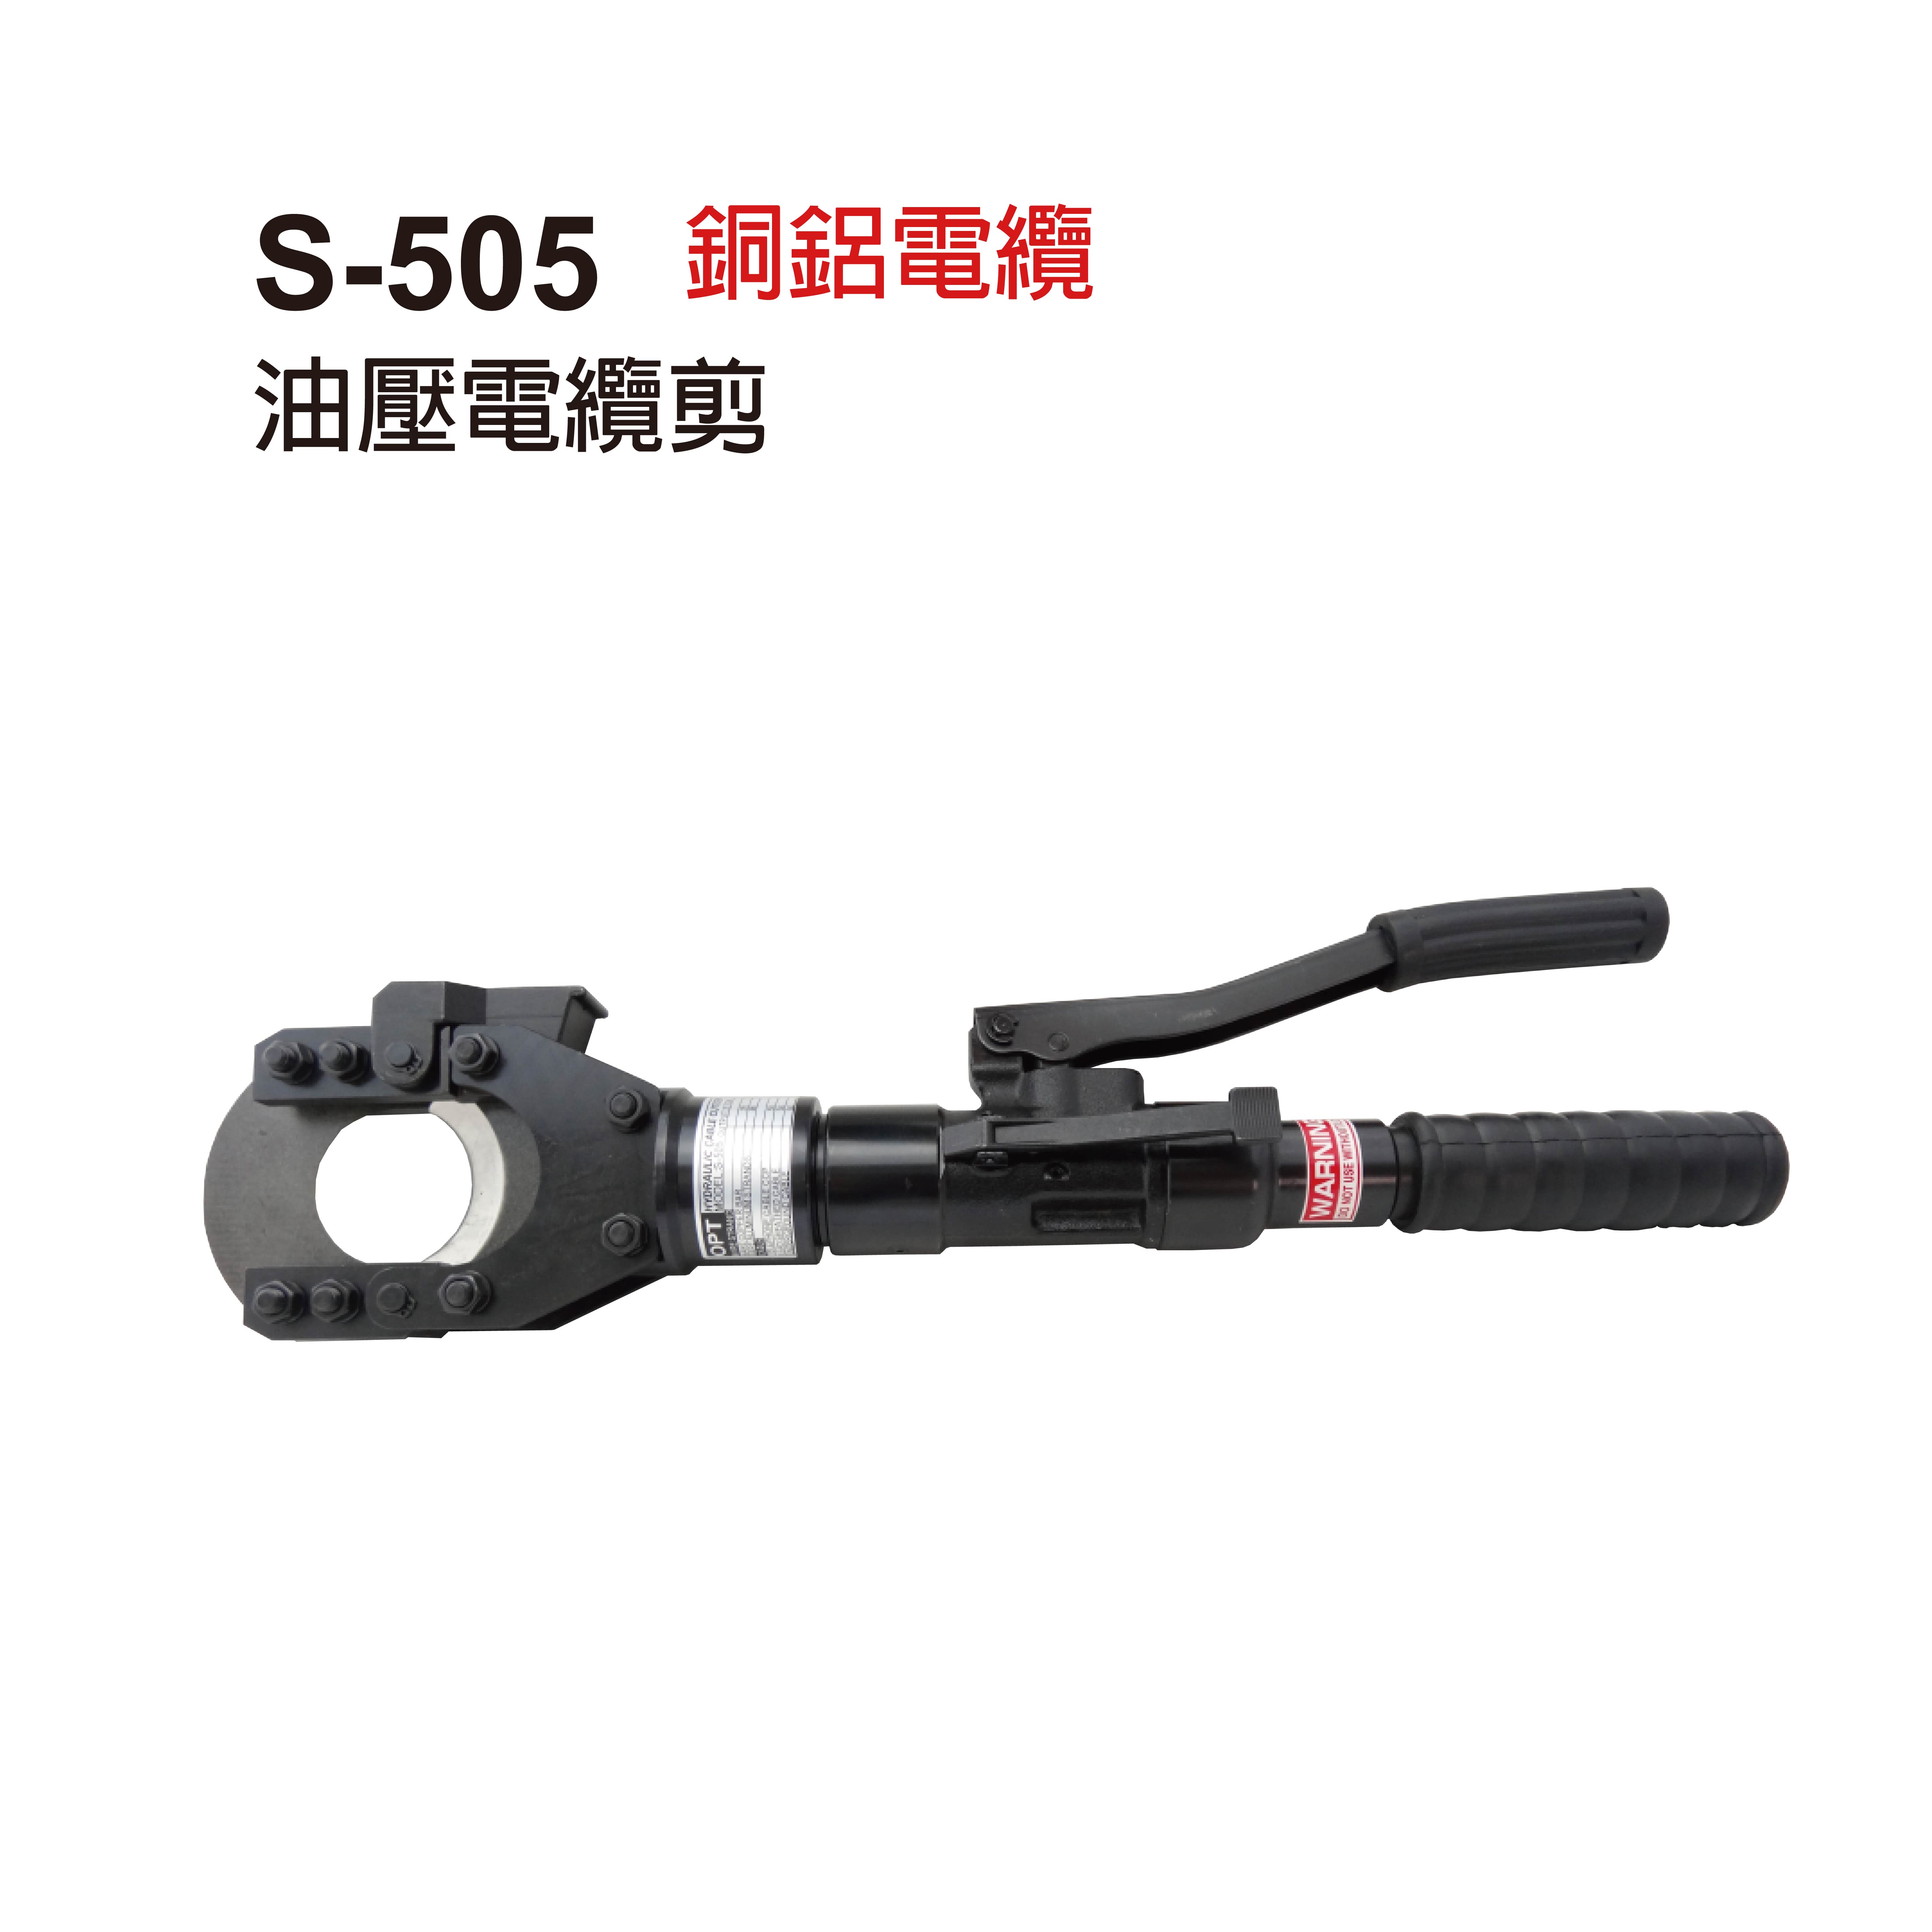 S-505 MANUAL HYDRAULIC CABLE CUTTERS-S-505